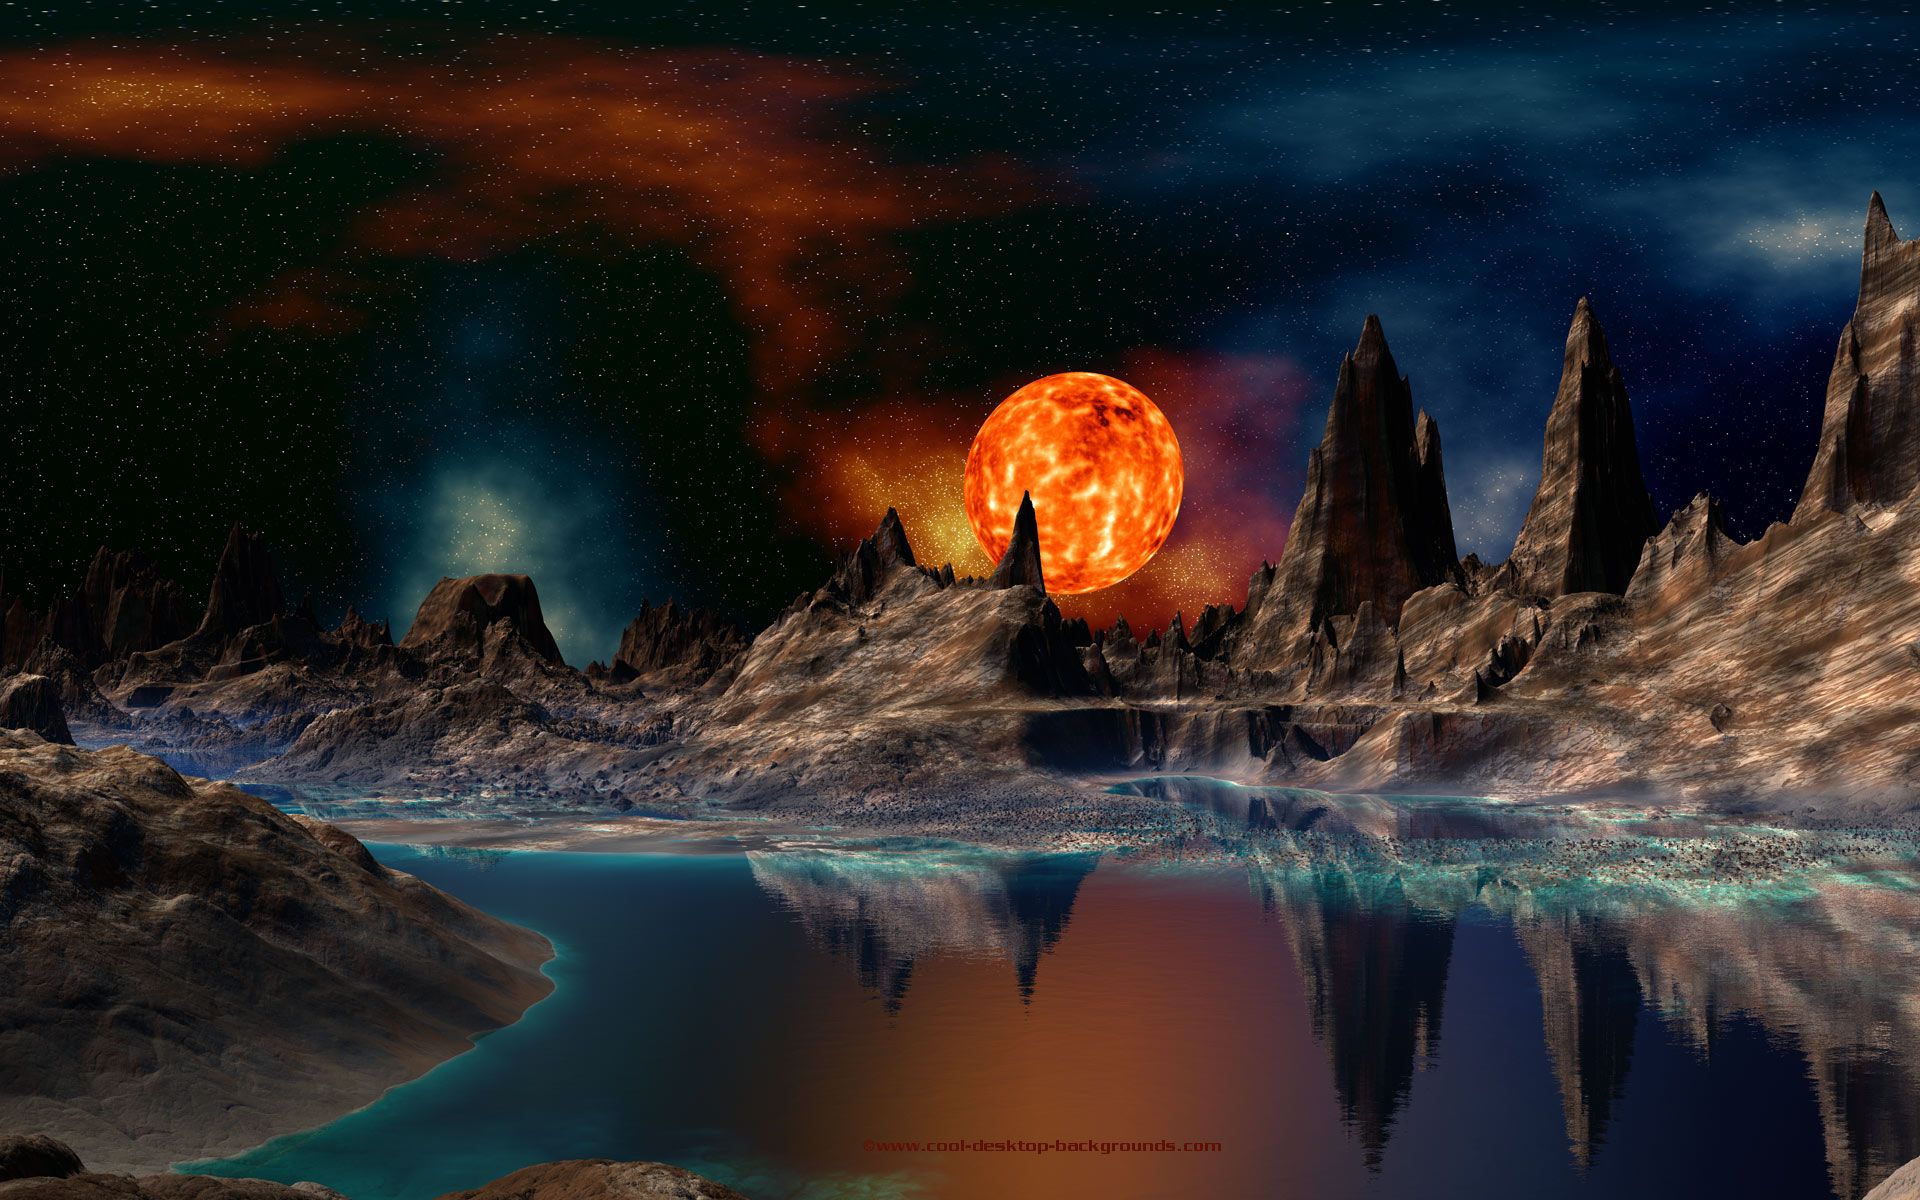 Science Fiction Background Images - Free Download on Freepik